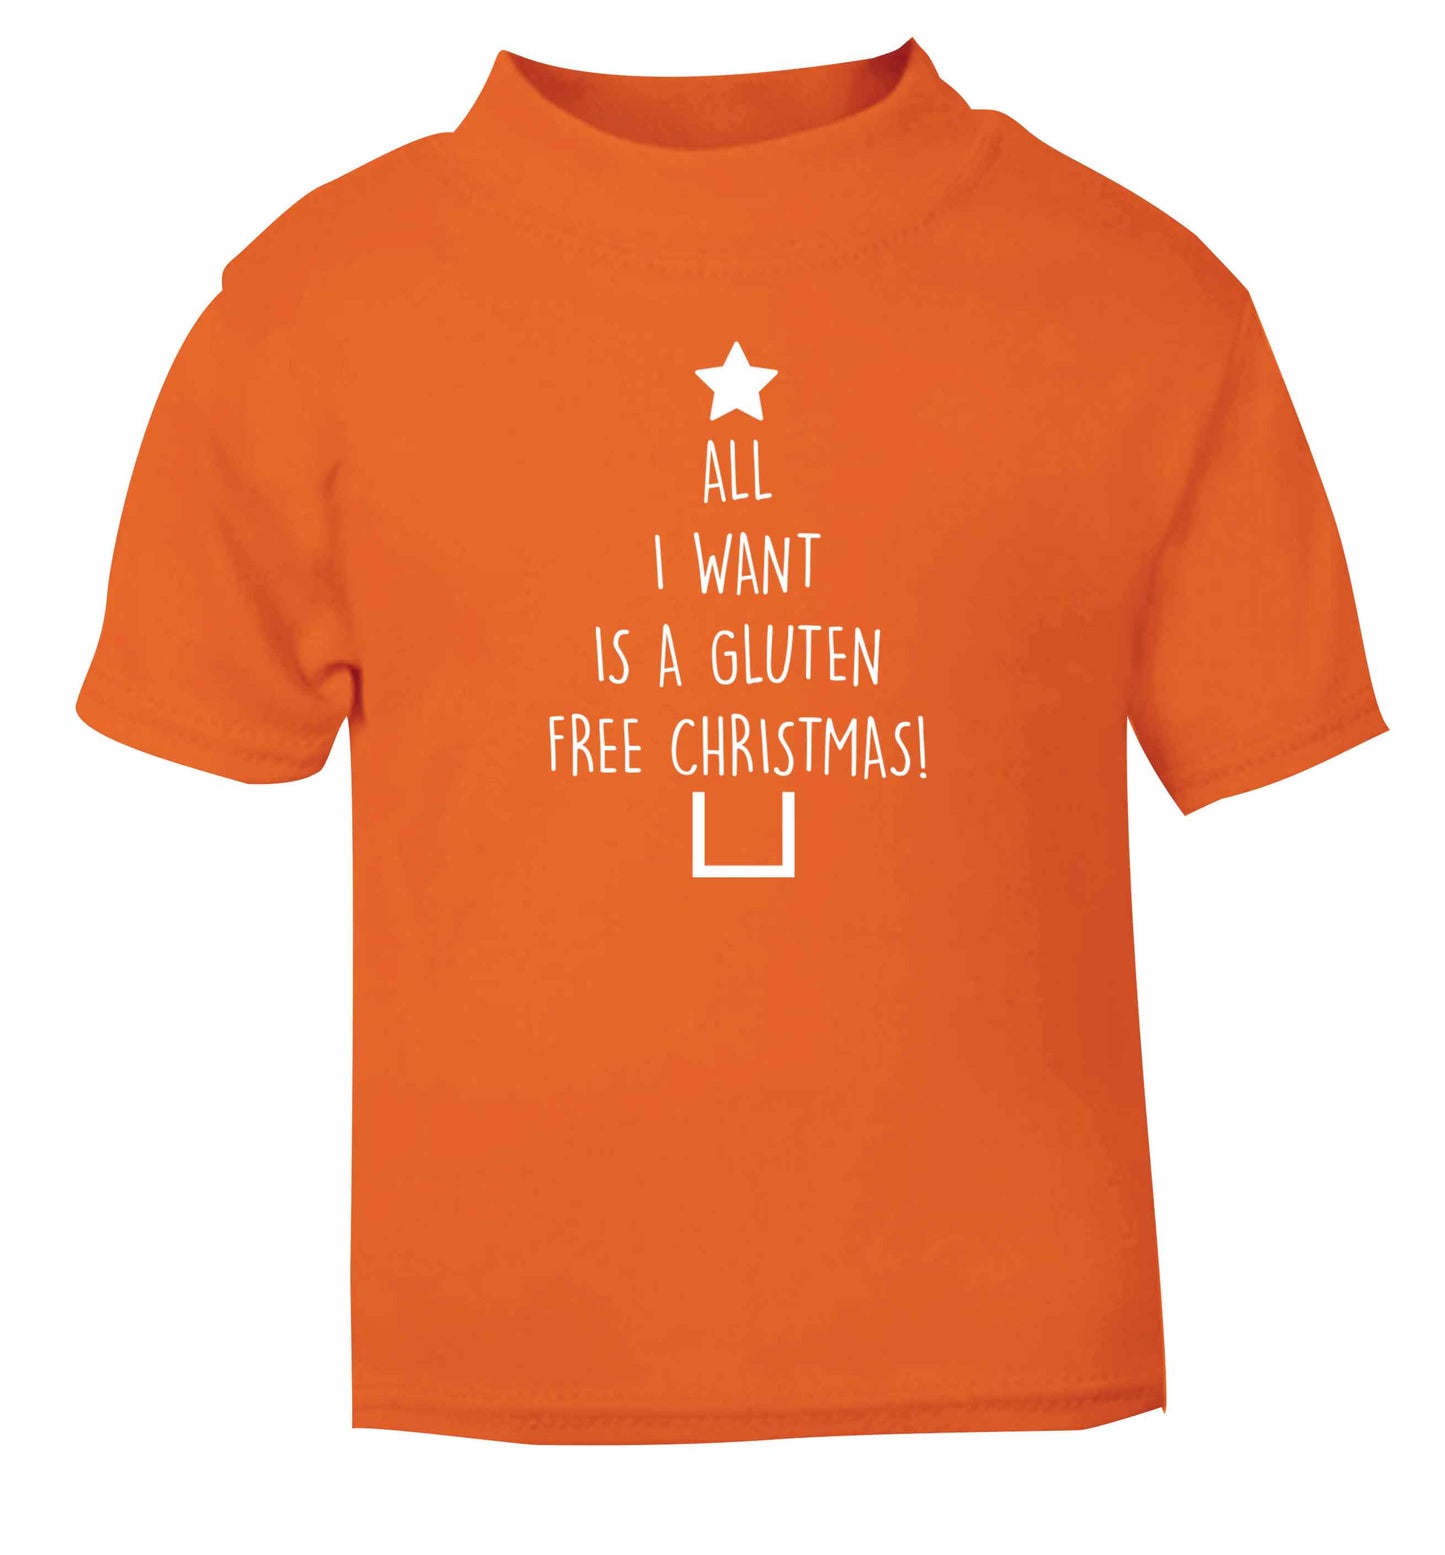 All I want is a gluten free Christmas orange Baby Toddler Tshirt 2 Years